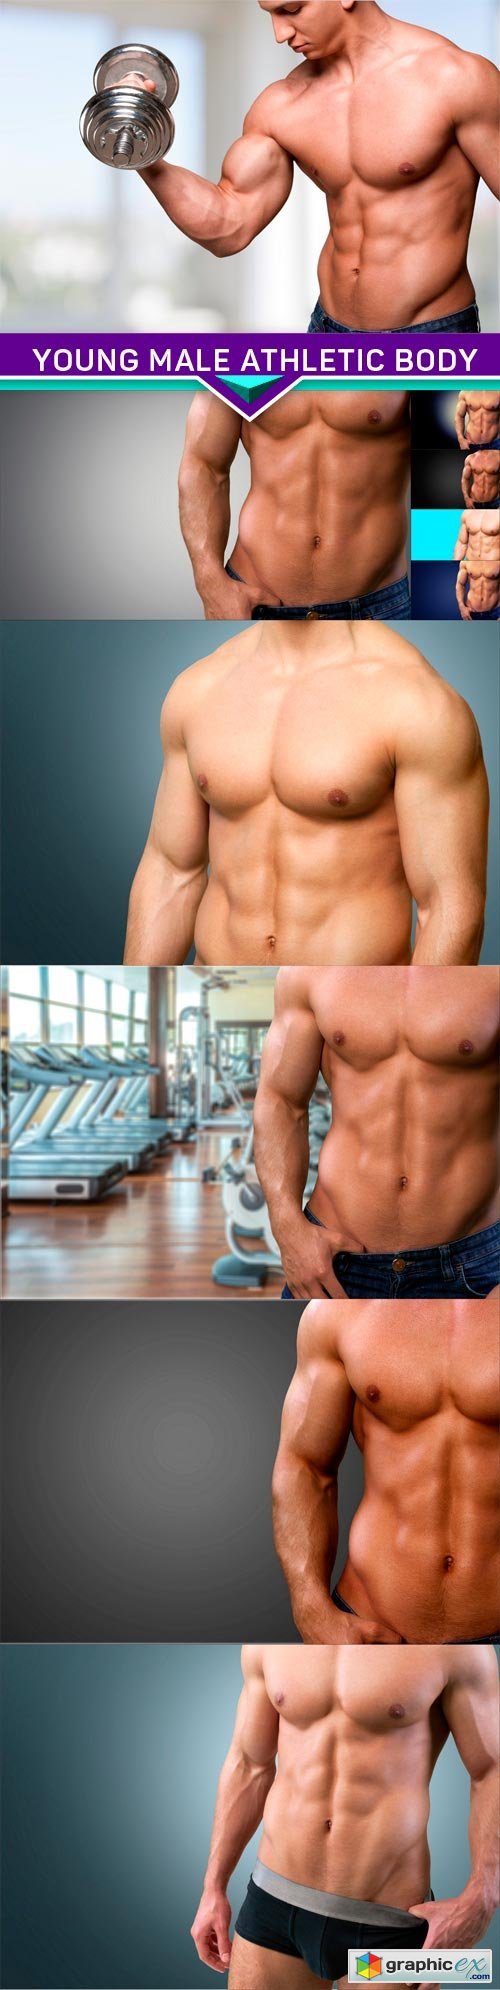 Young male athletic body 10x JPEG